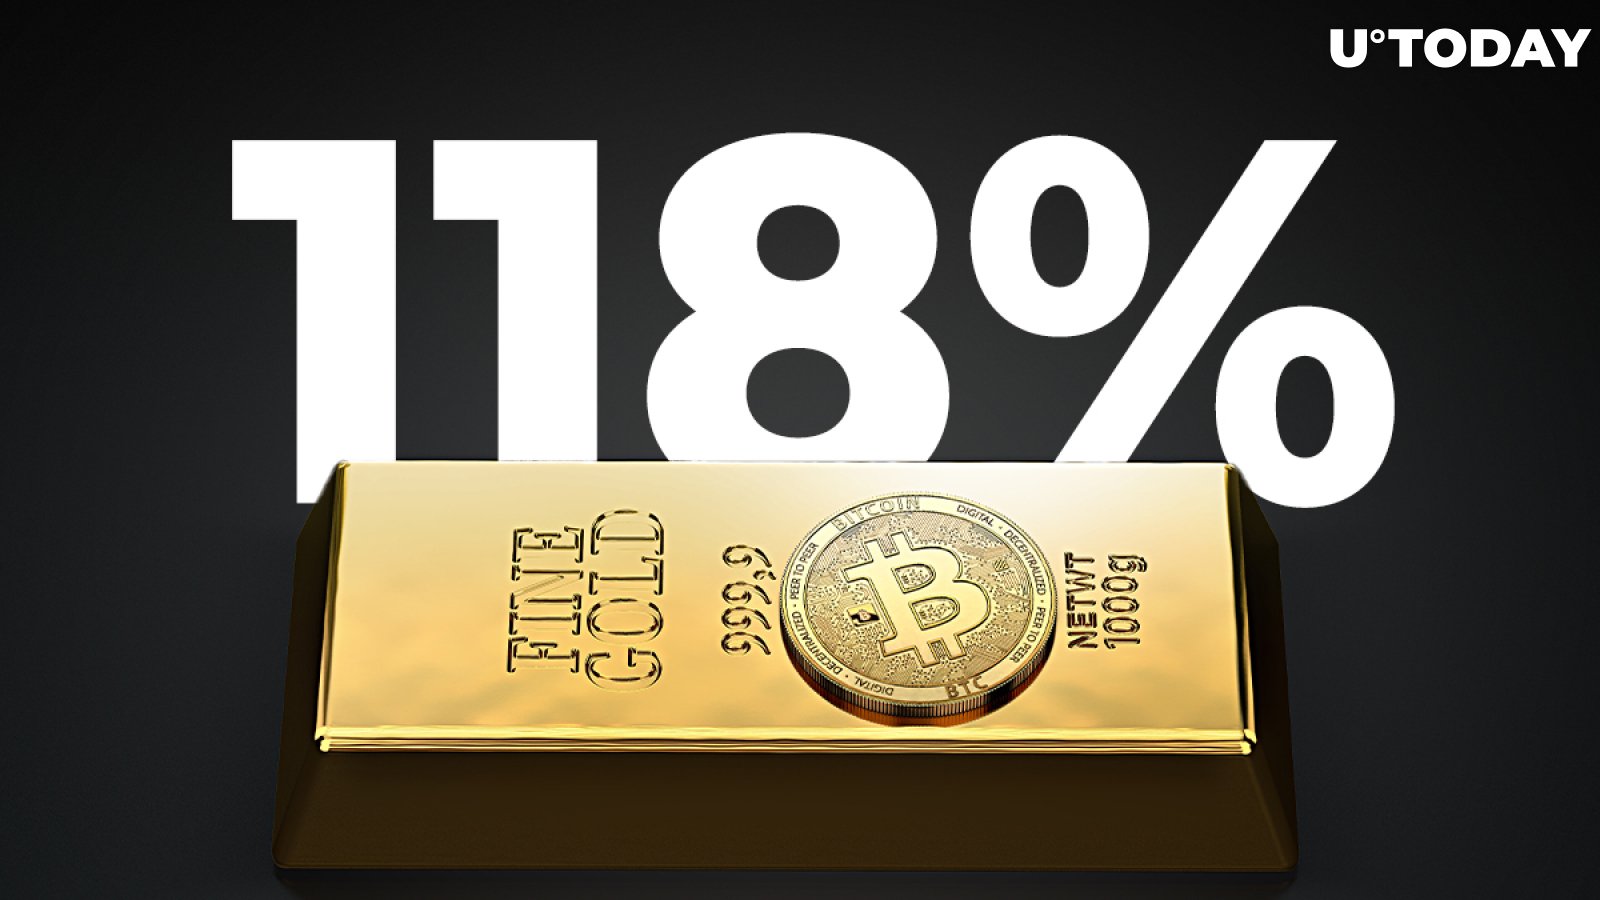 Bitcoin Rose 118% YTD, Massively Outperforming Gold, Stocks, and Dollar